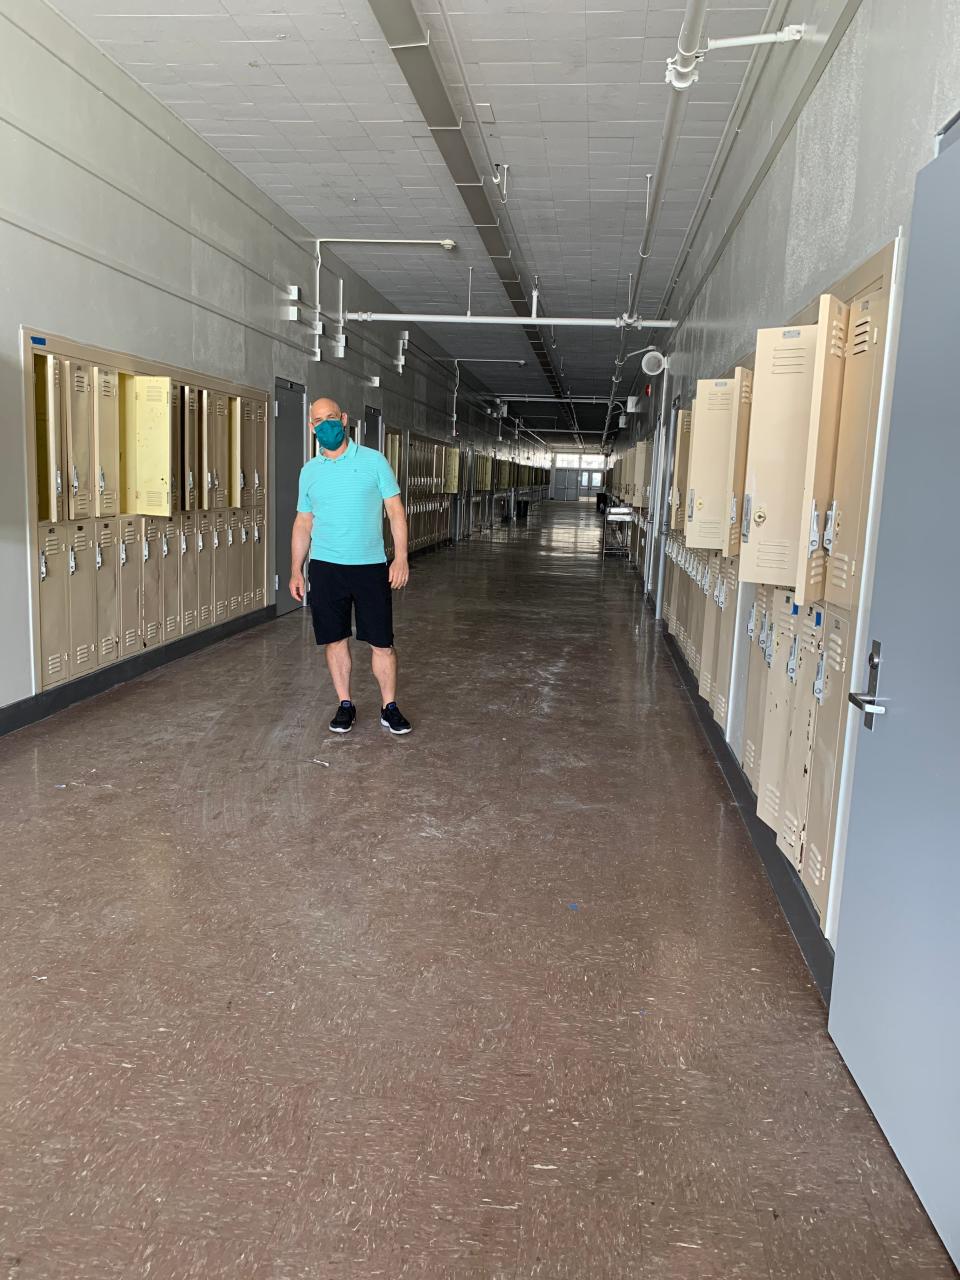 Larry Strauss, who is teaching remote summer school for Venice (Calif.) High School students, at the deserted school on July 25, 2020.